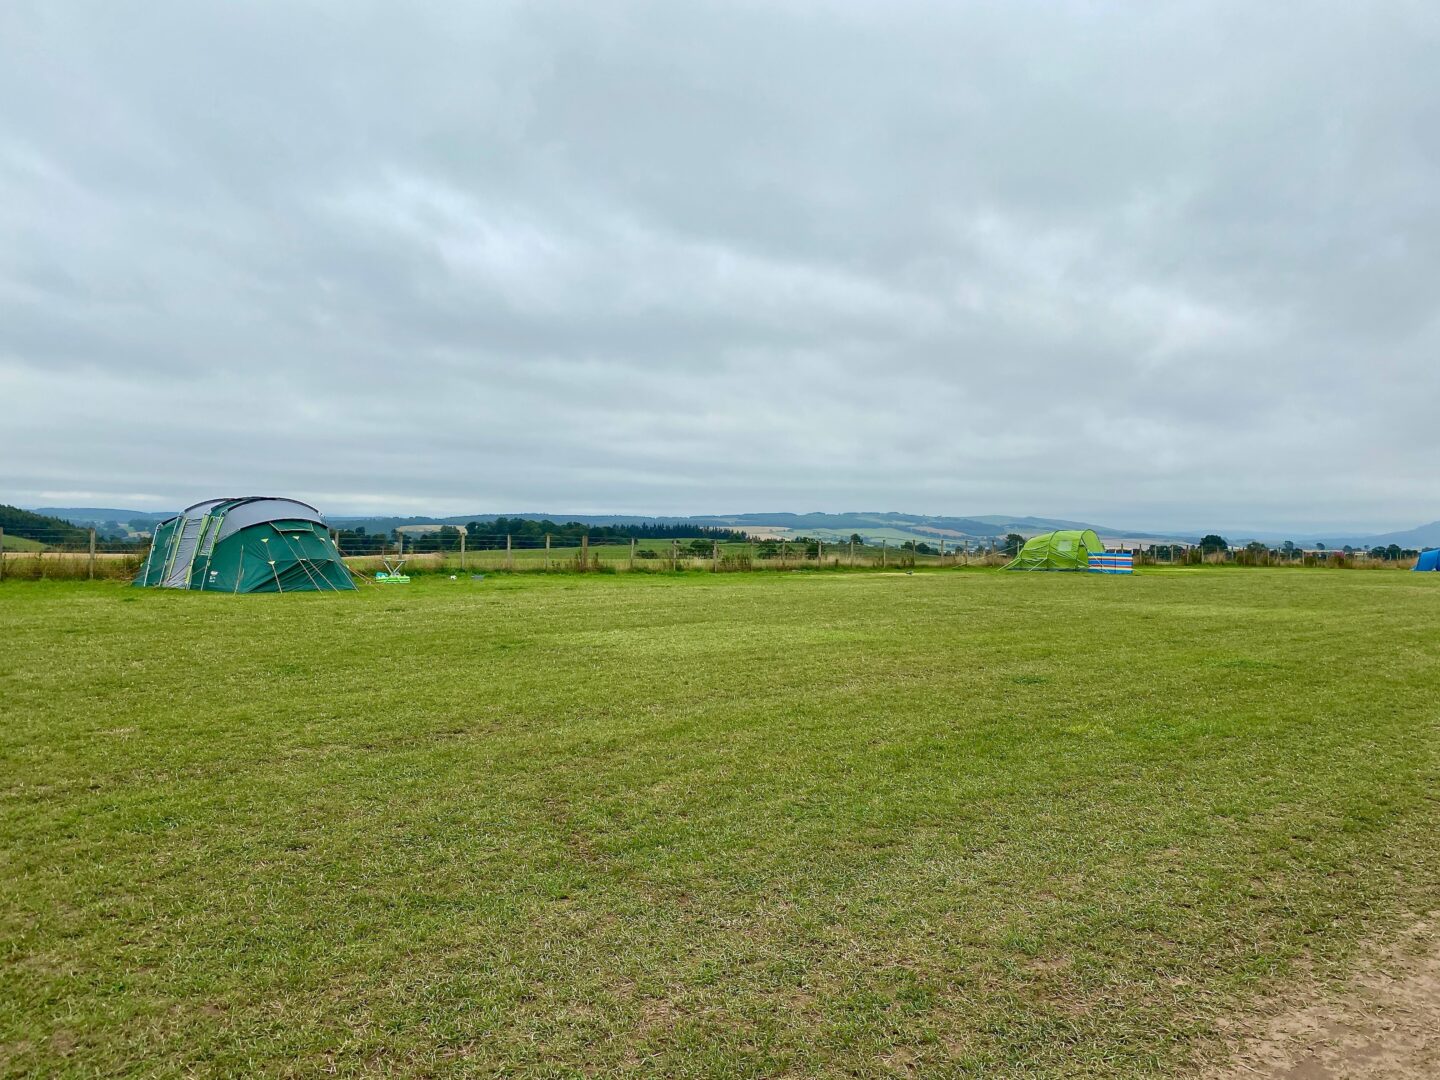 Free camping in the UK - two green tents in an empty field